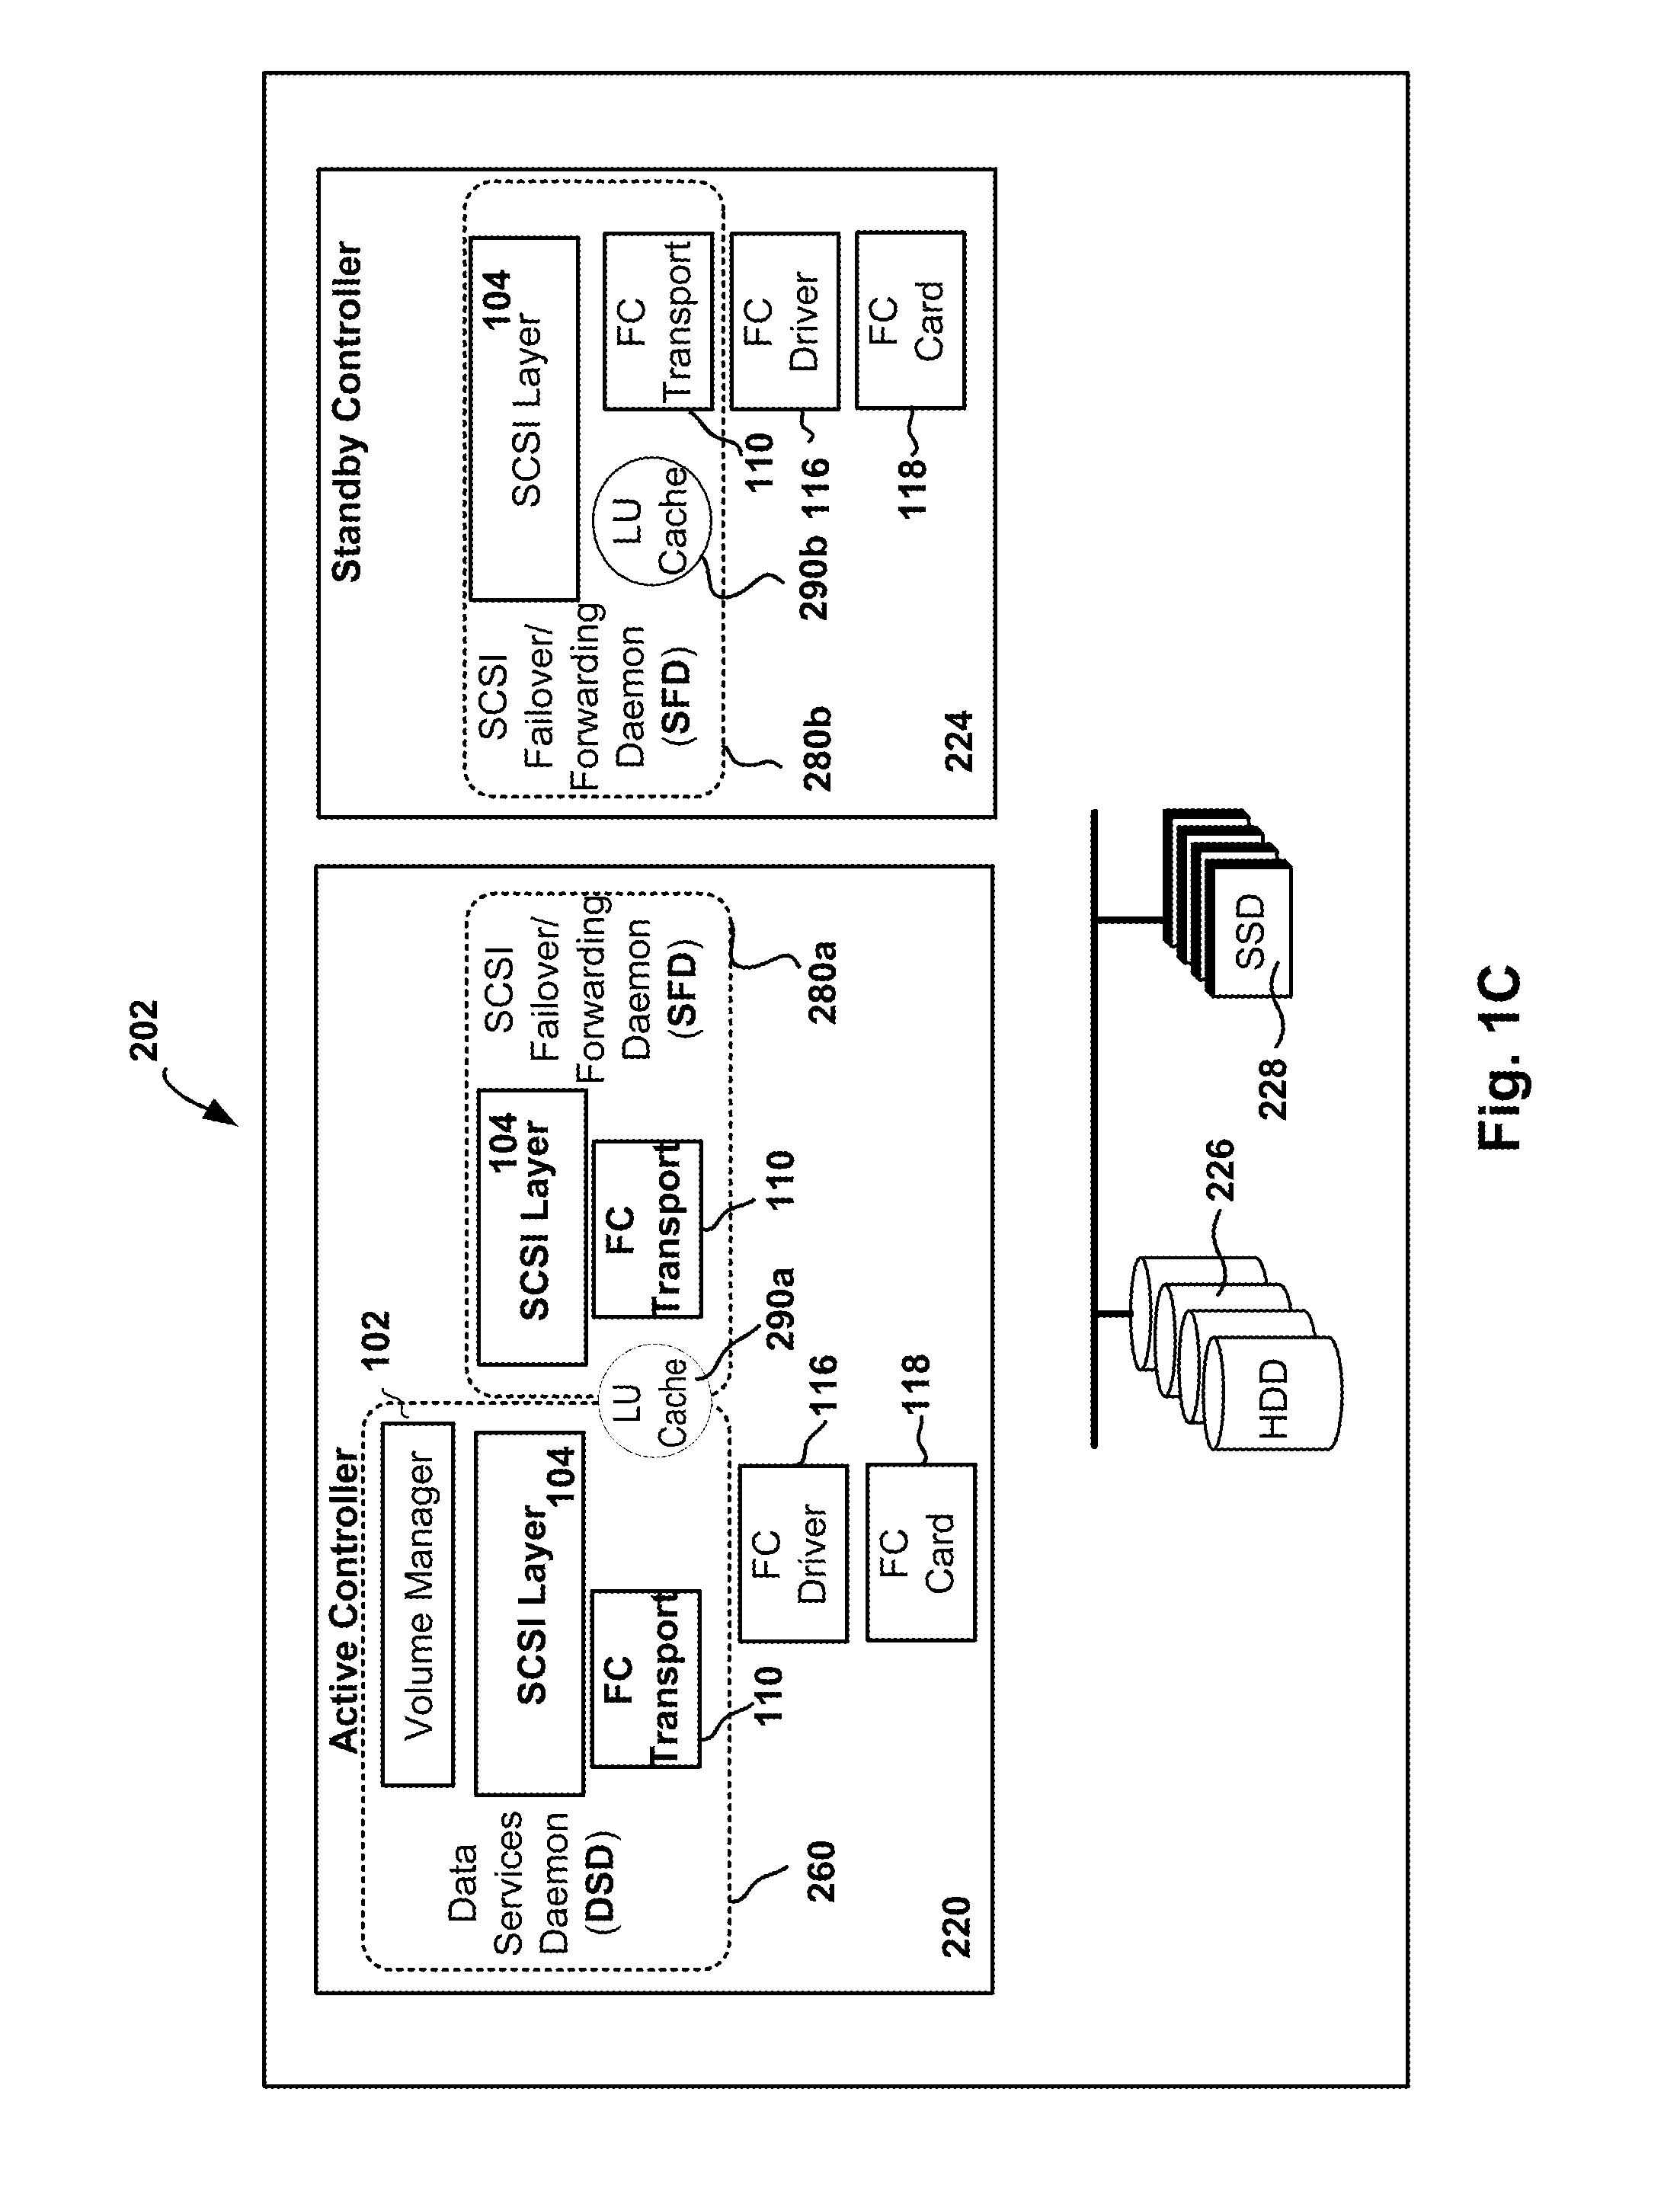 Fibre Channel Storage Array Methods for Handling Cache-Consistency Among Controllers of an Array and Consistency Among Arrays of a Pool